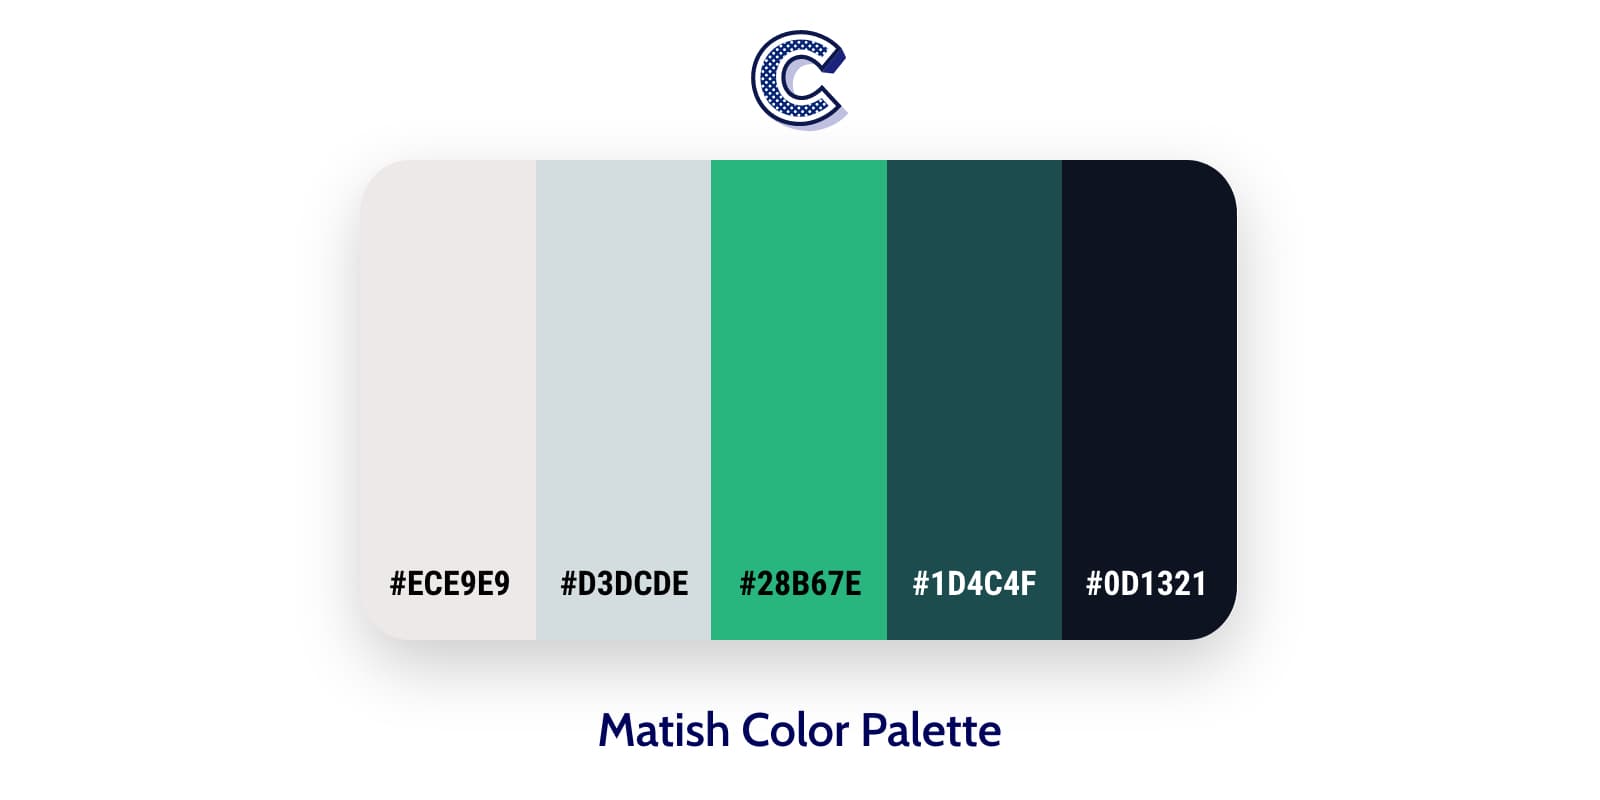 the featured image of matish color palette